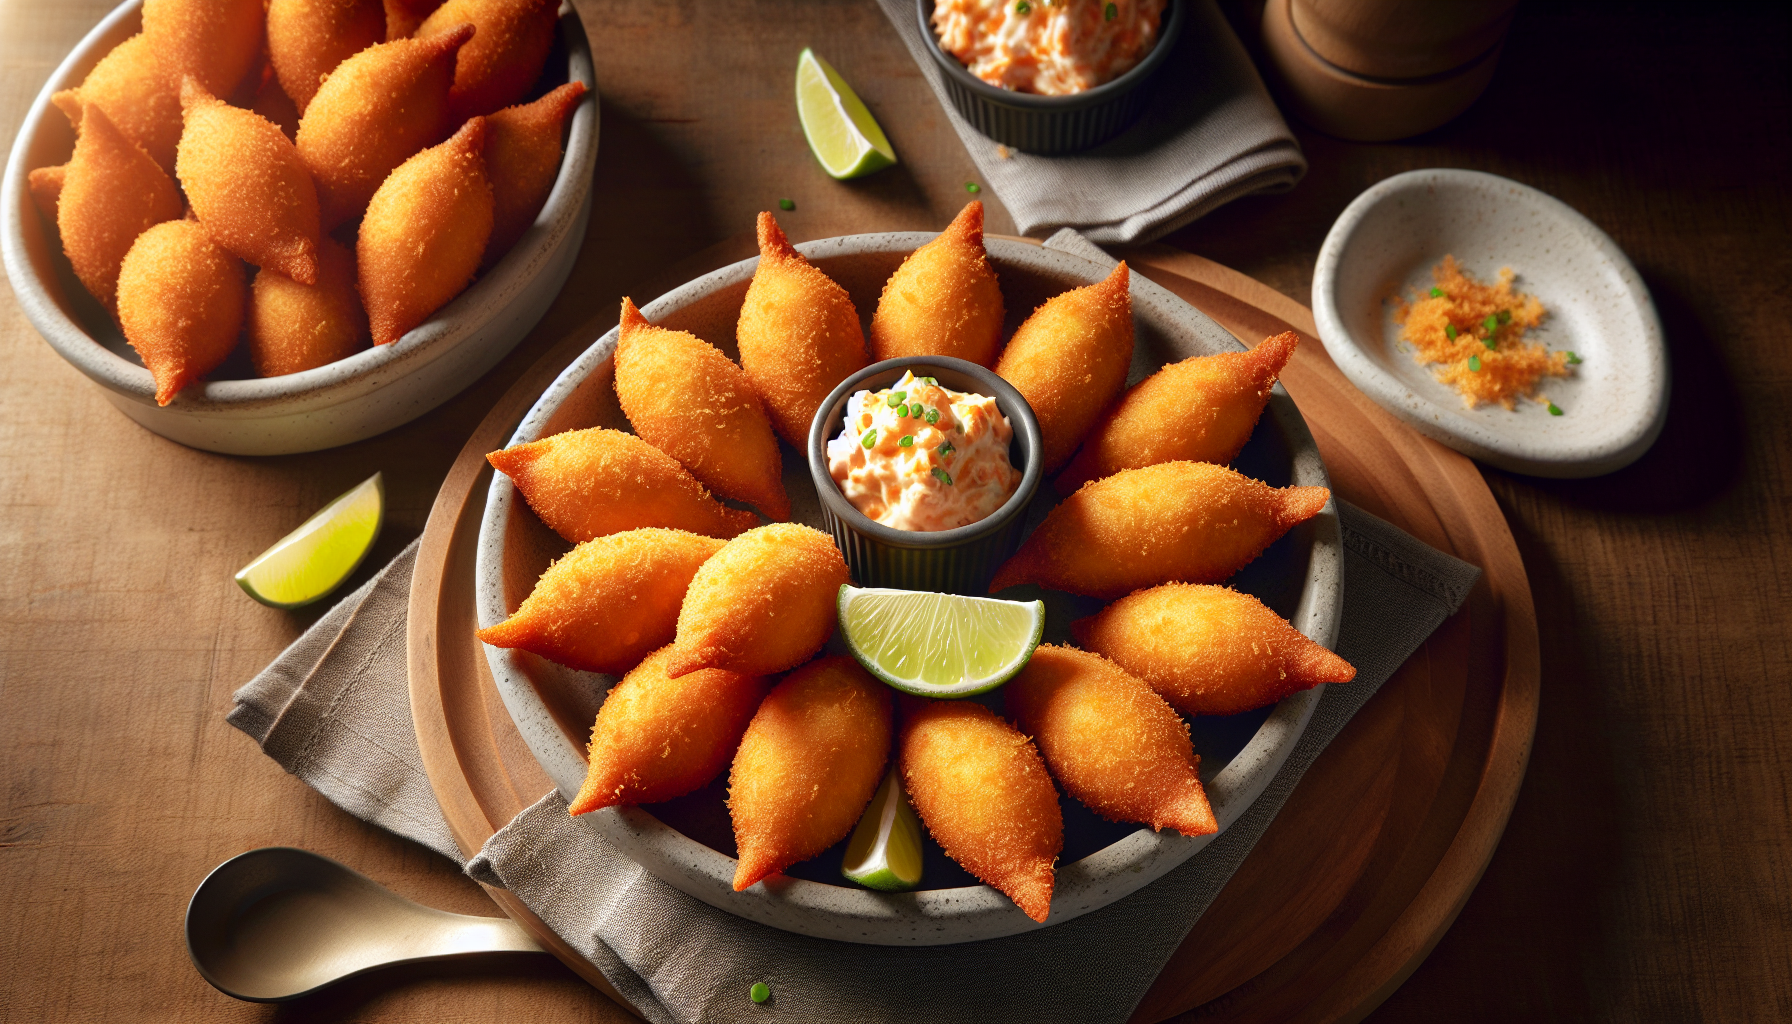 Can You Recommend A Brazilian Appetizer That’s Easy To Share At Parties?